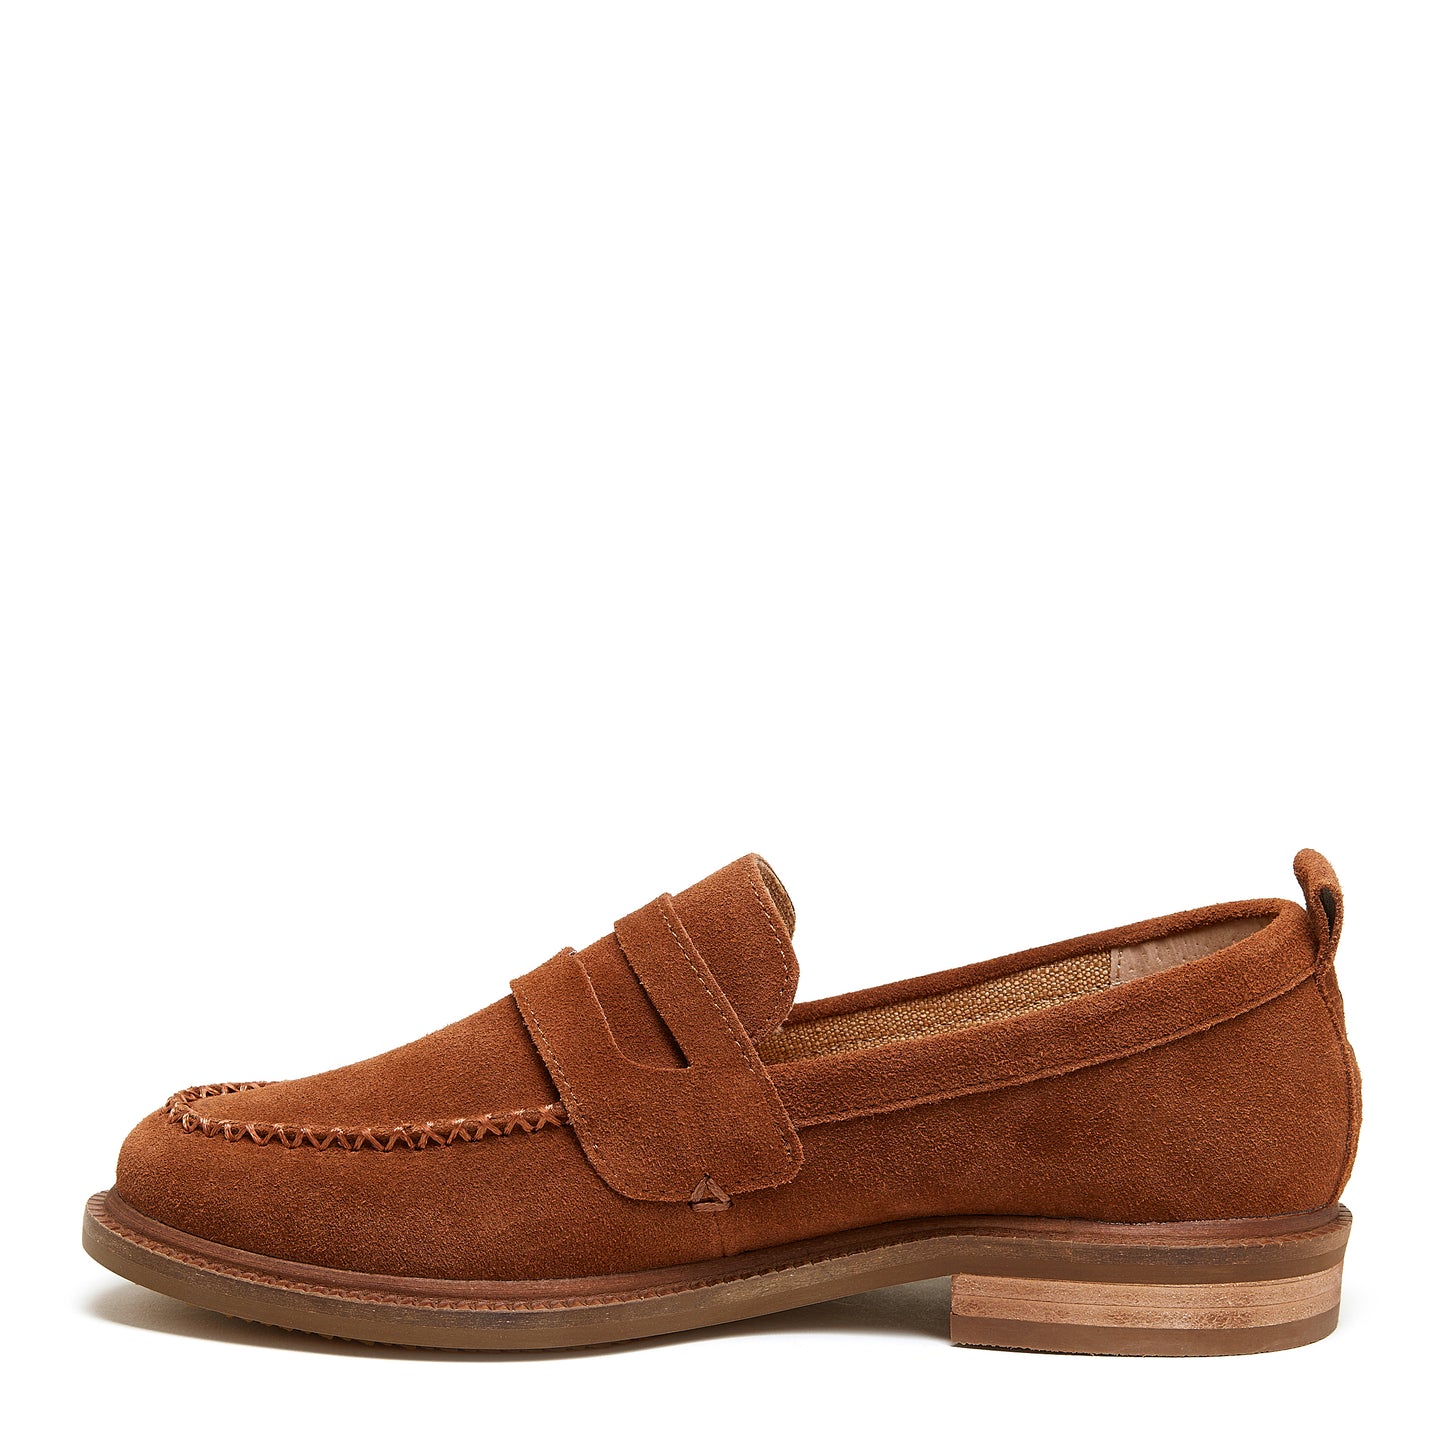 Lens Hickory Suede Loafers